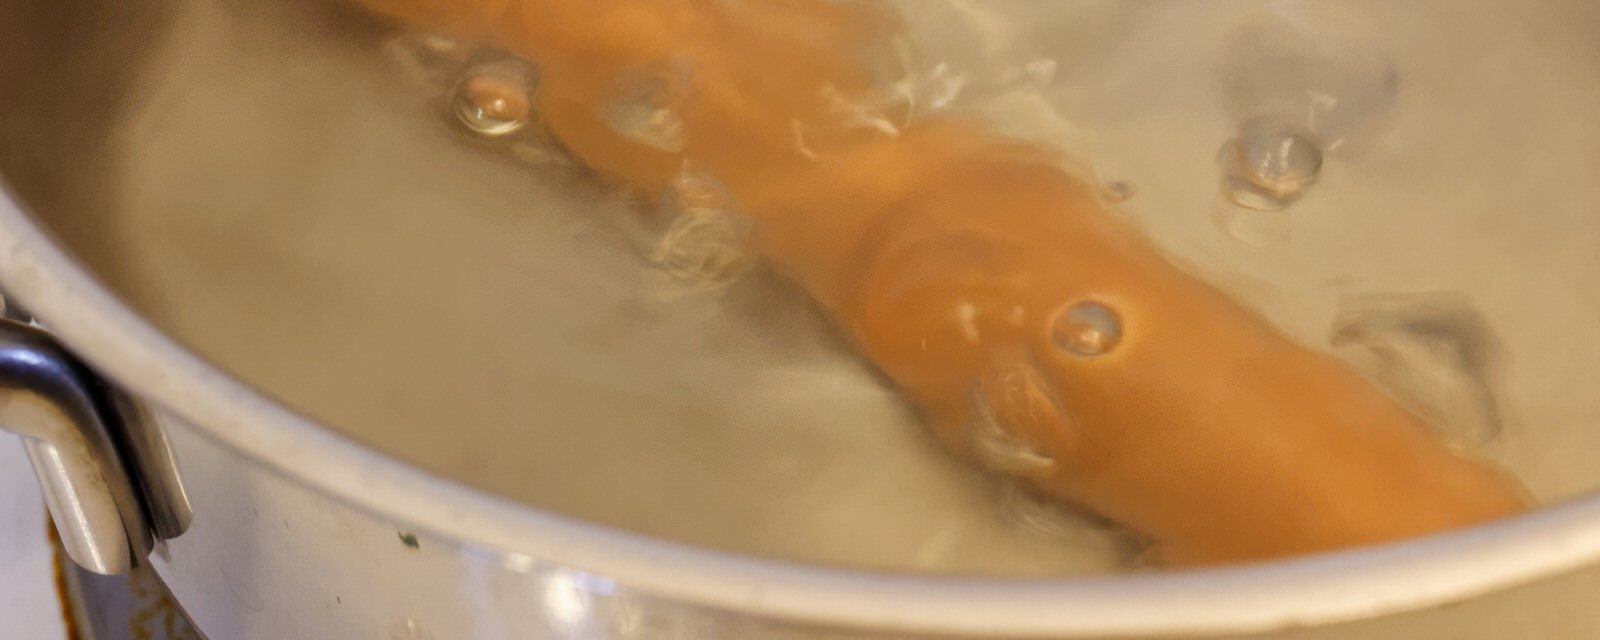 Sausage cooking in boiling water